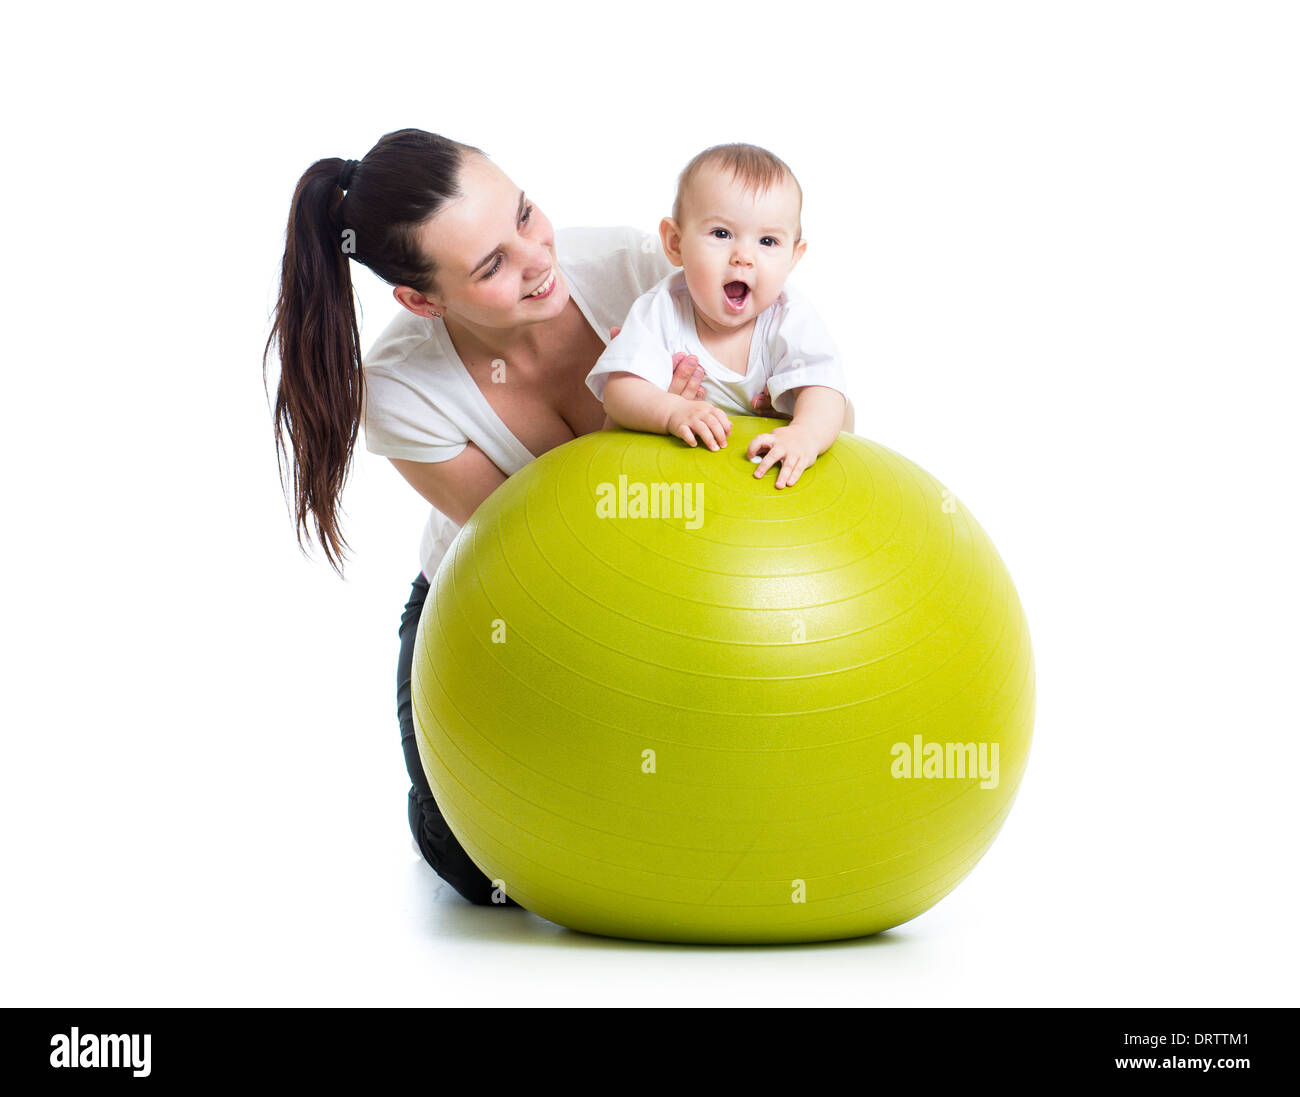 gymnastics for baby with fitness ball Stock Photo